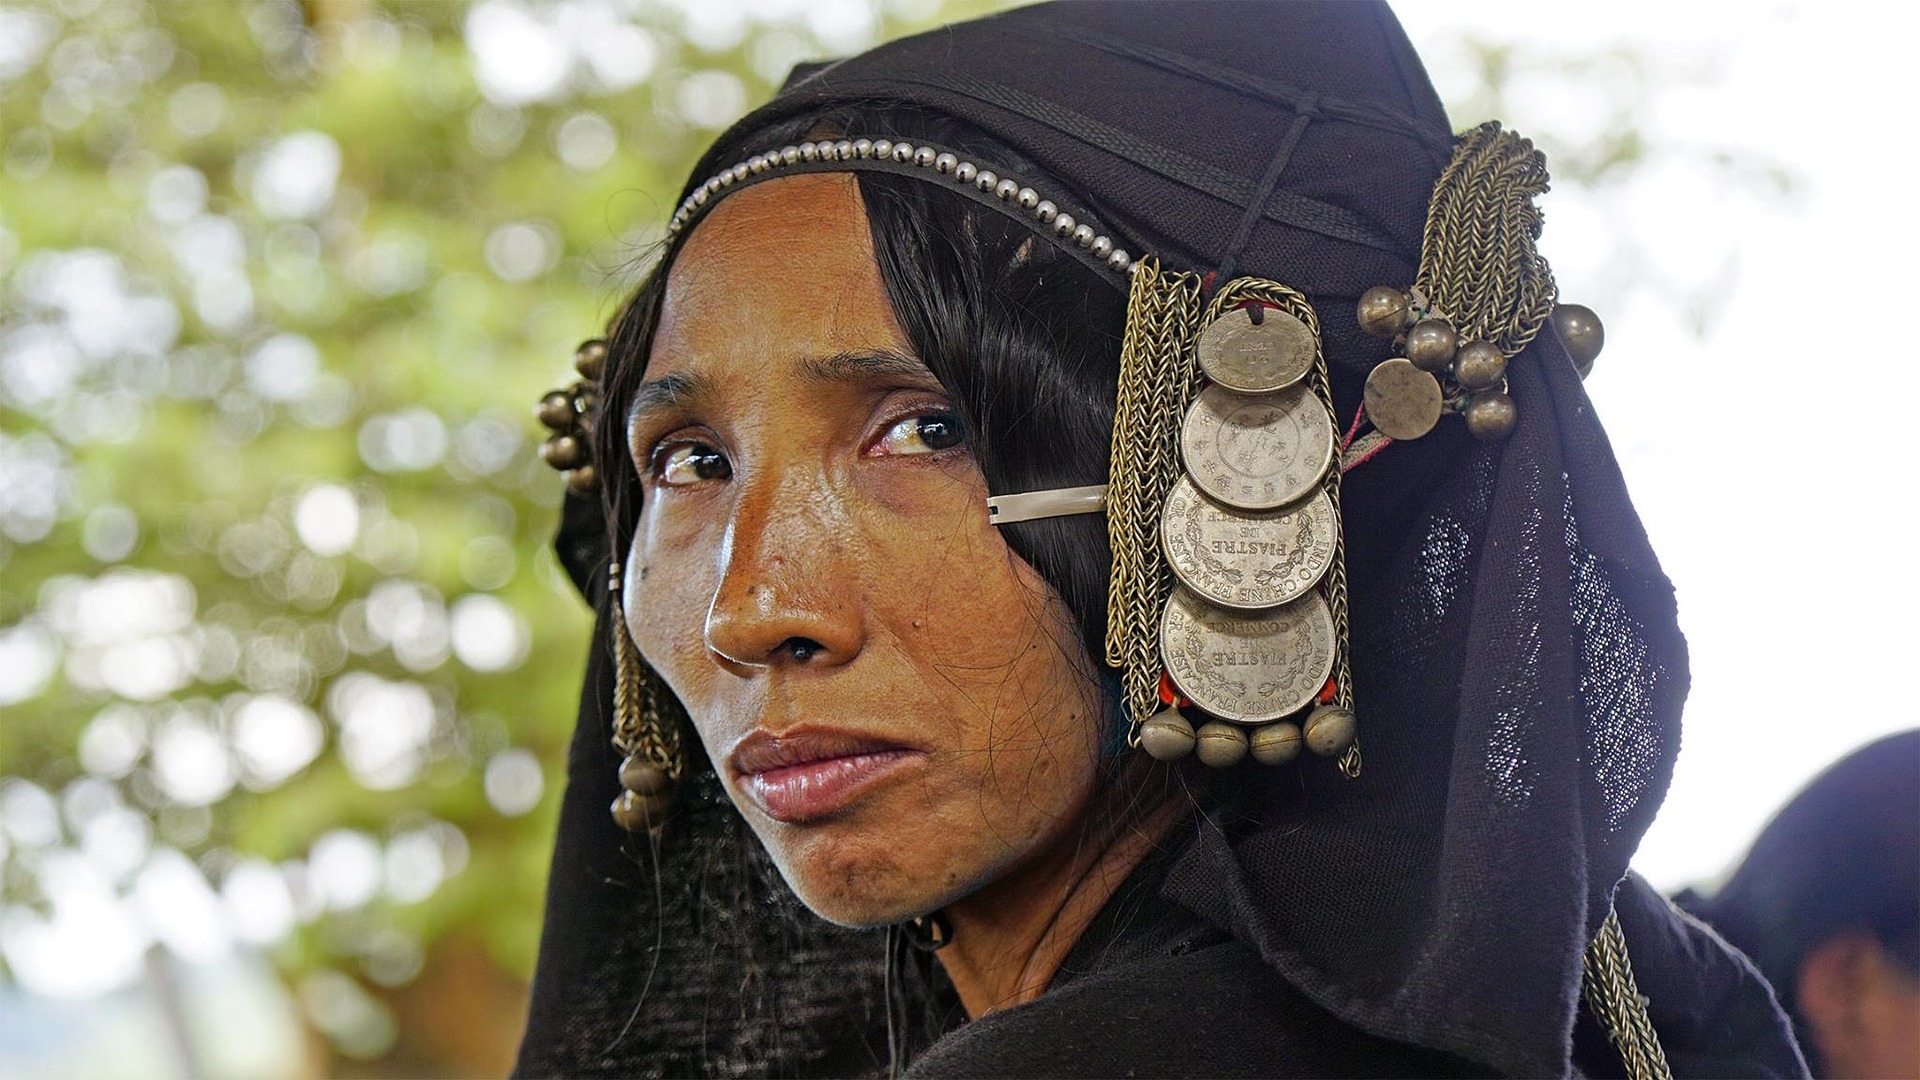 Oma Woman in Laos wearing a fashion style that was appropriated by fashion design house Max Mara.